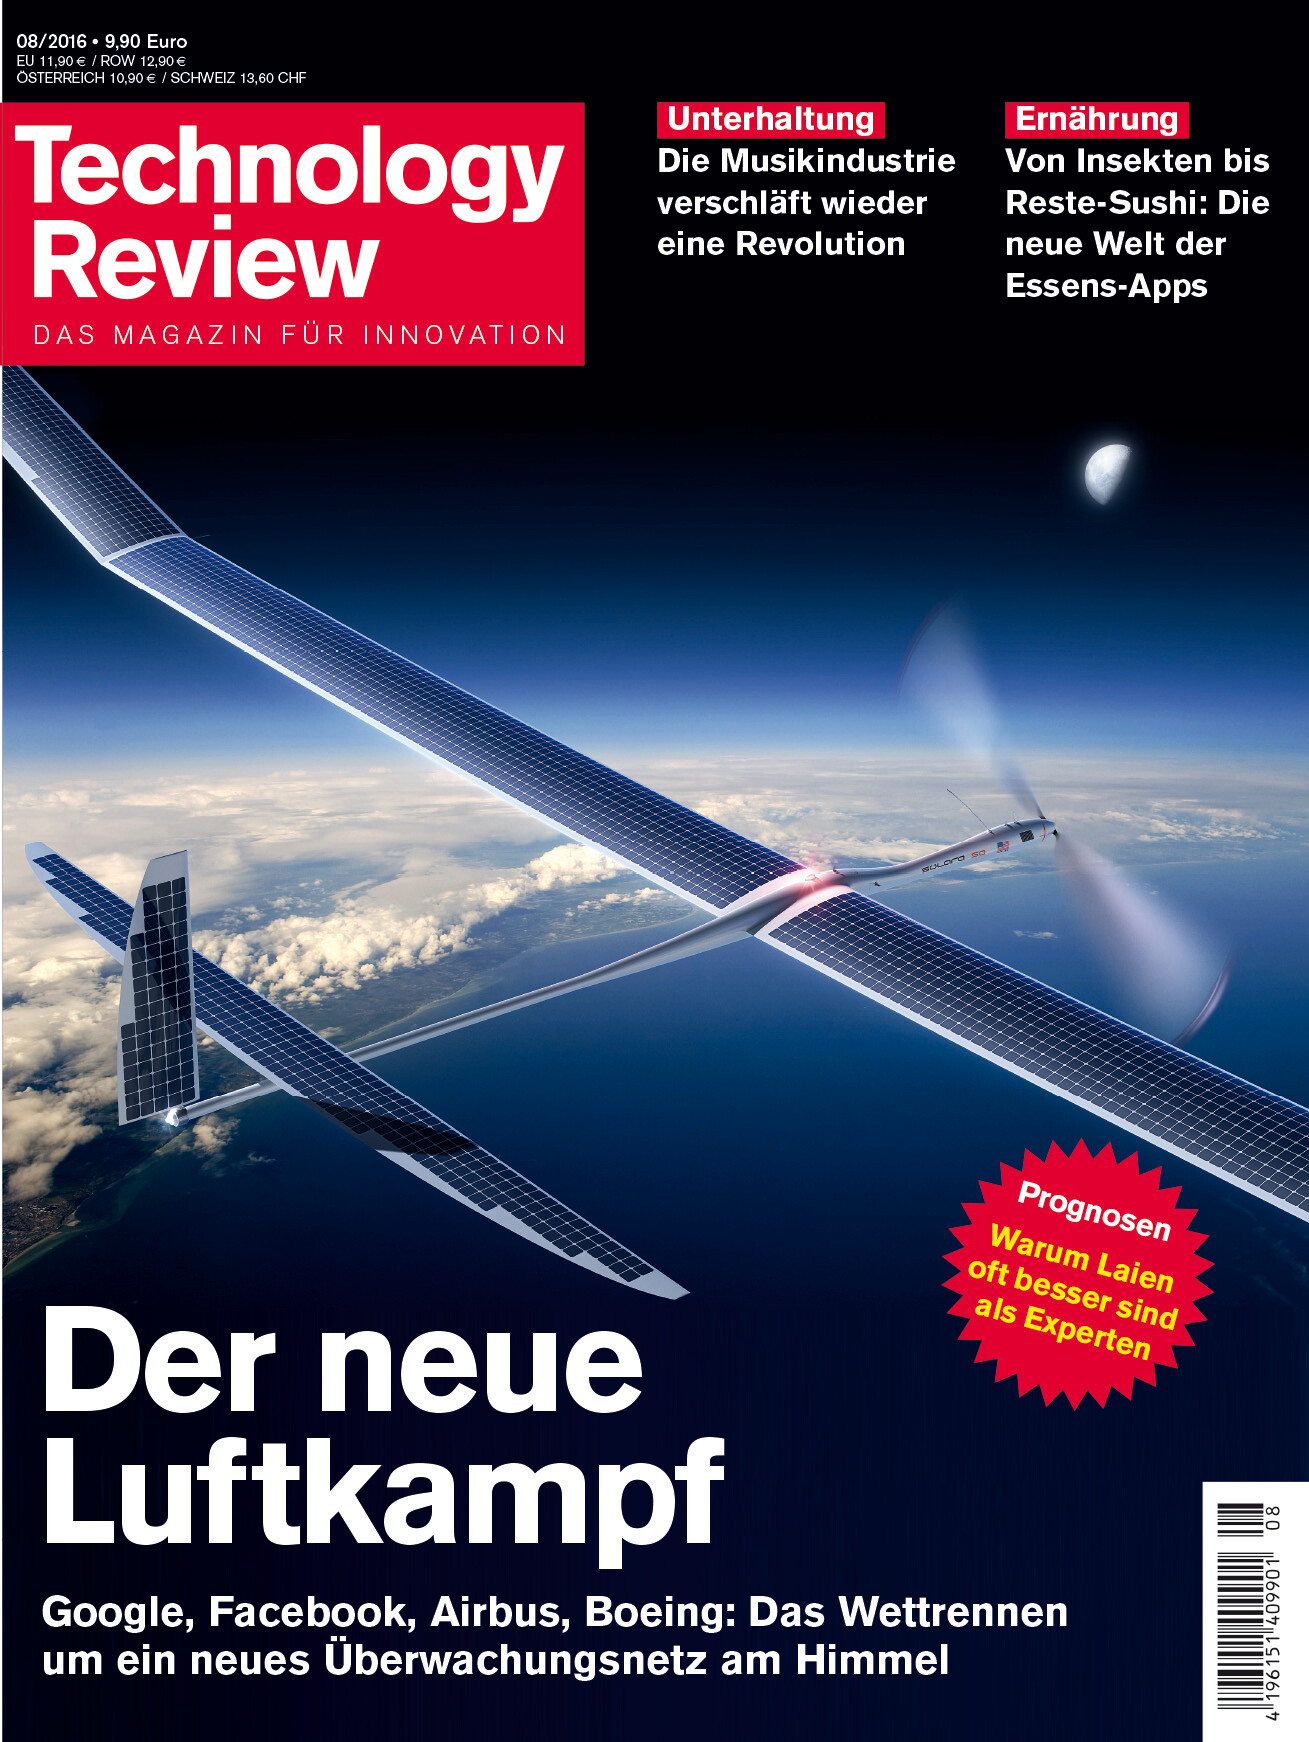 Technology Review 08/2016